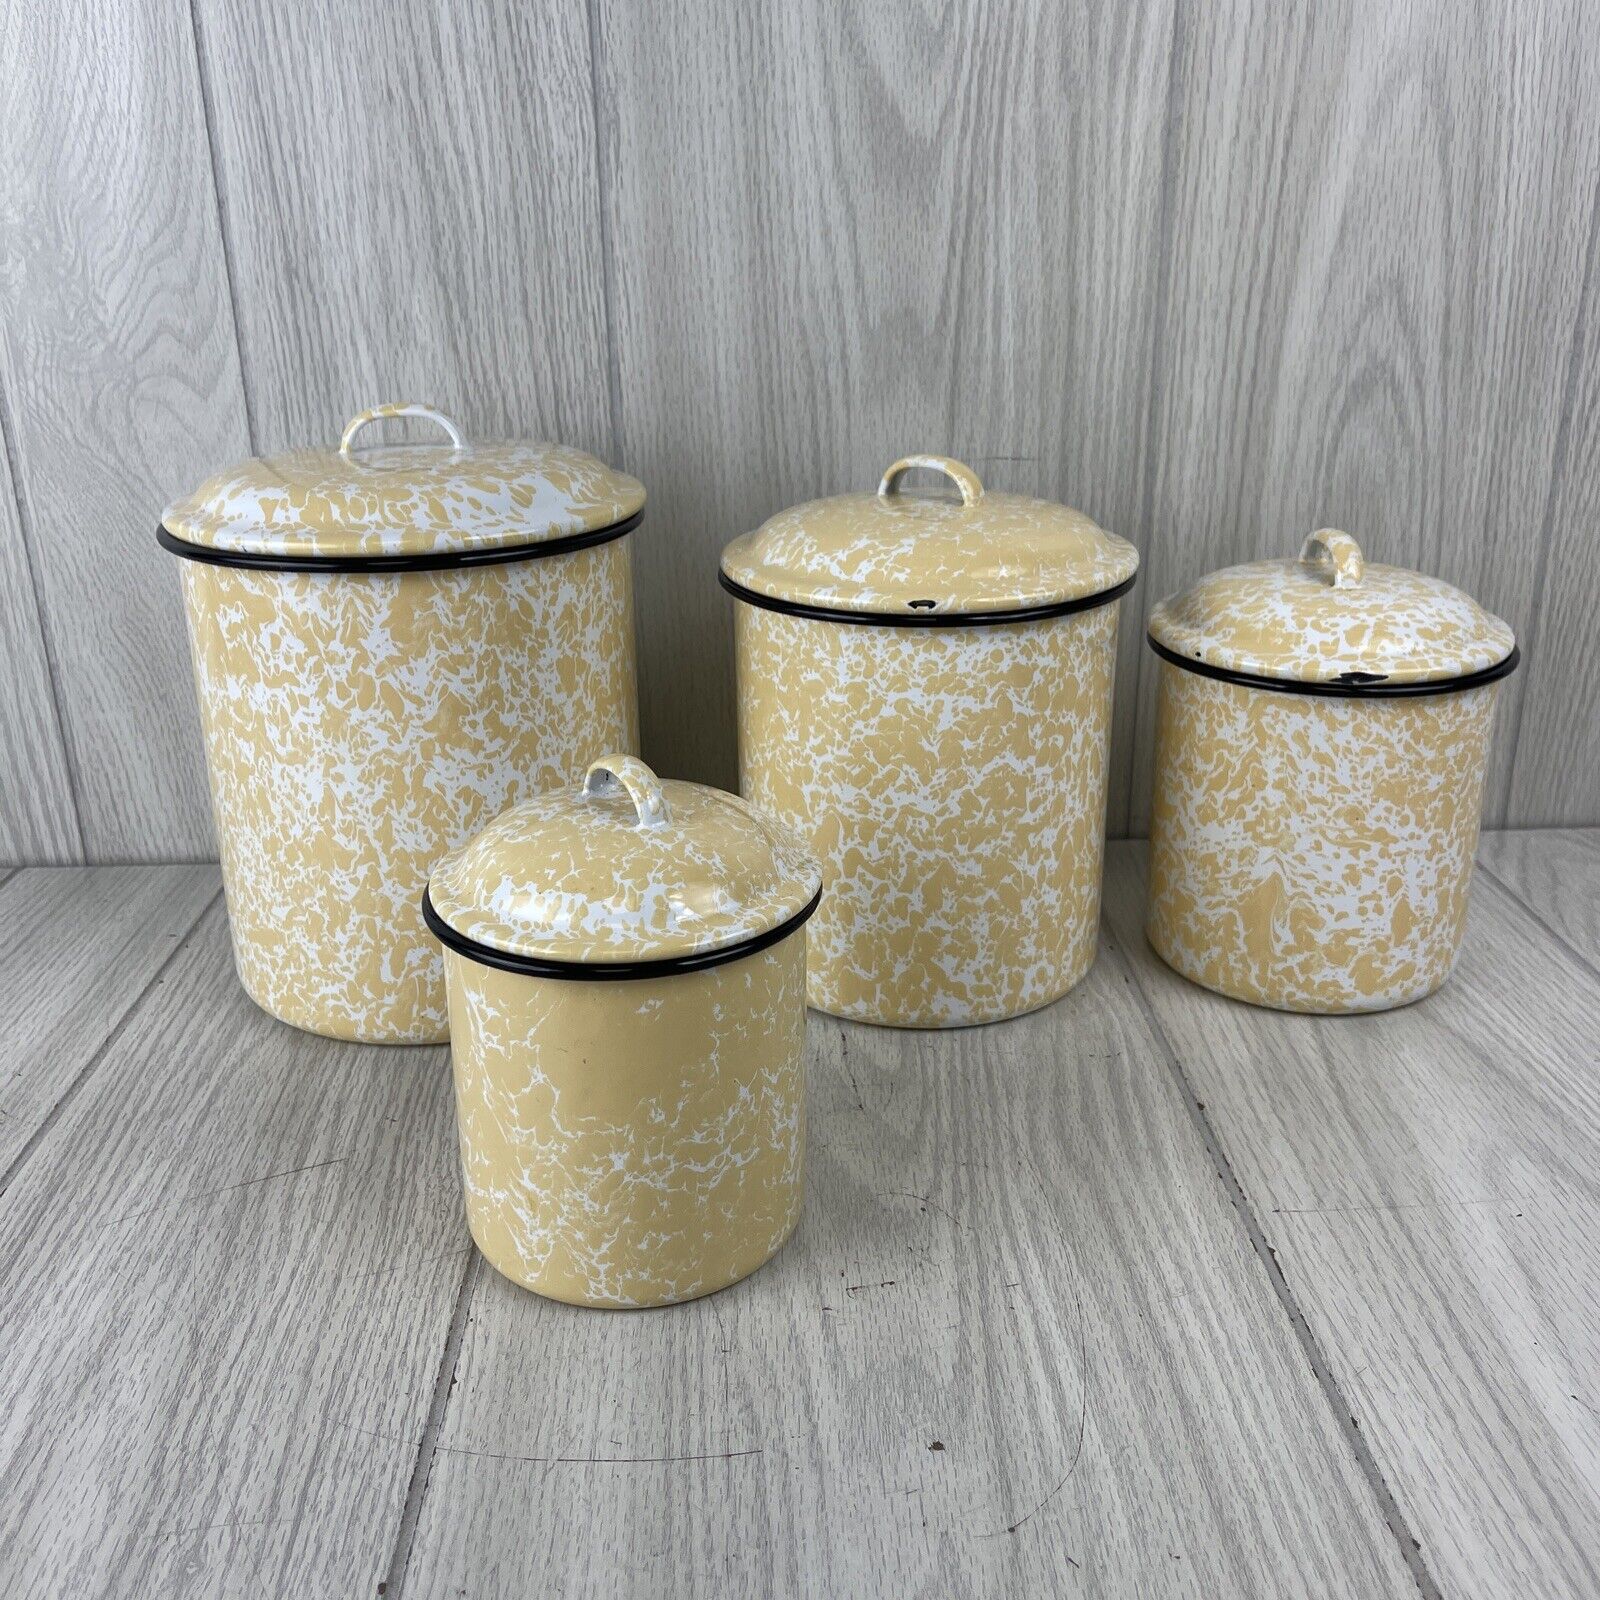 CGS International Enamelware Yellow Spatter Canister Set of 4 Stacking Canisters